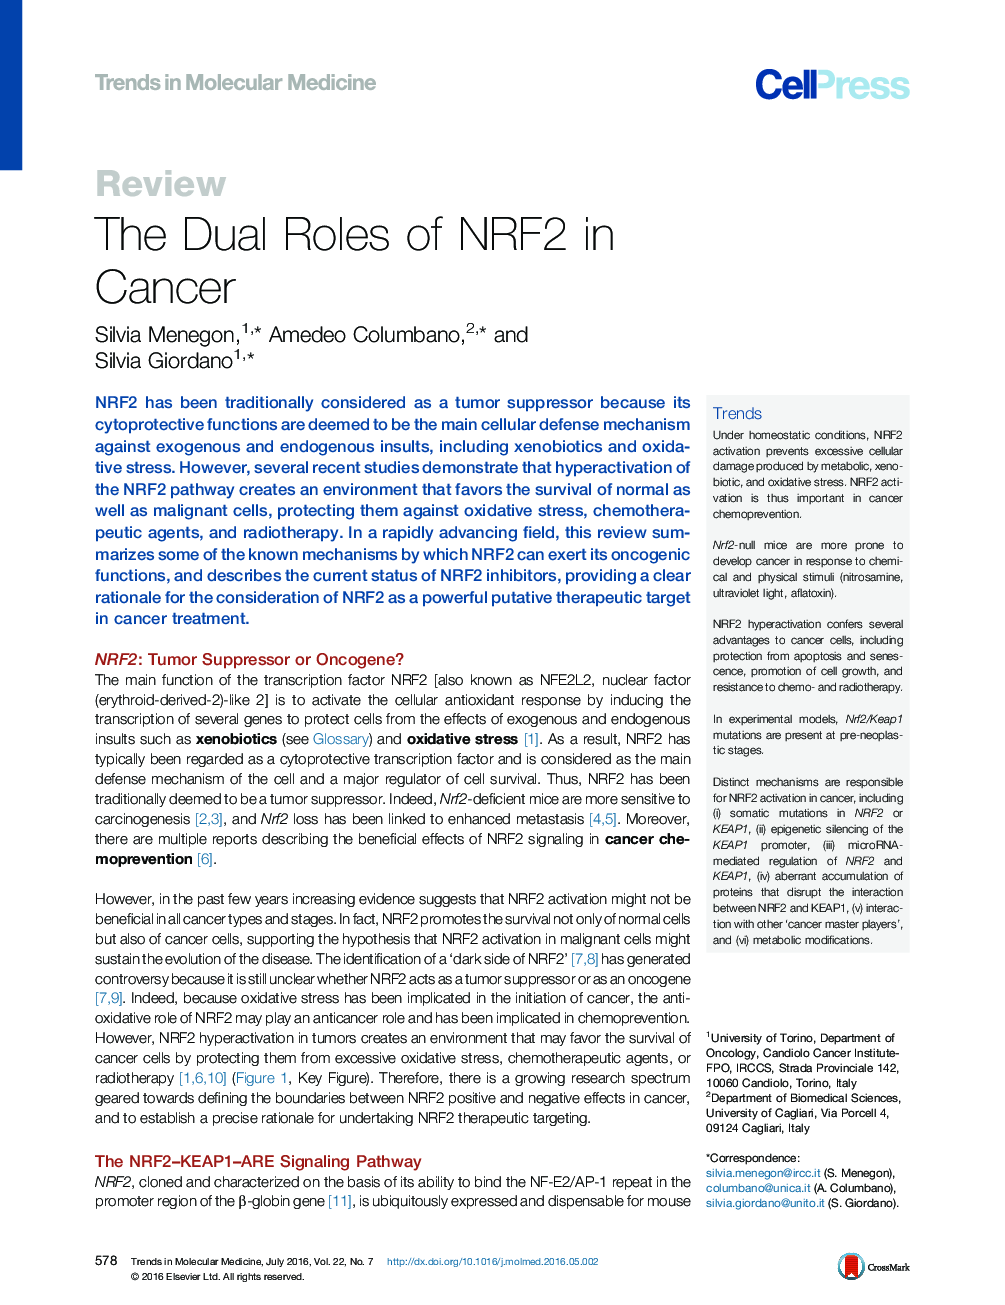 The Dual Roles of NRF2 in Cancer